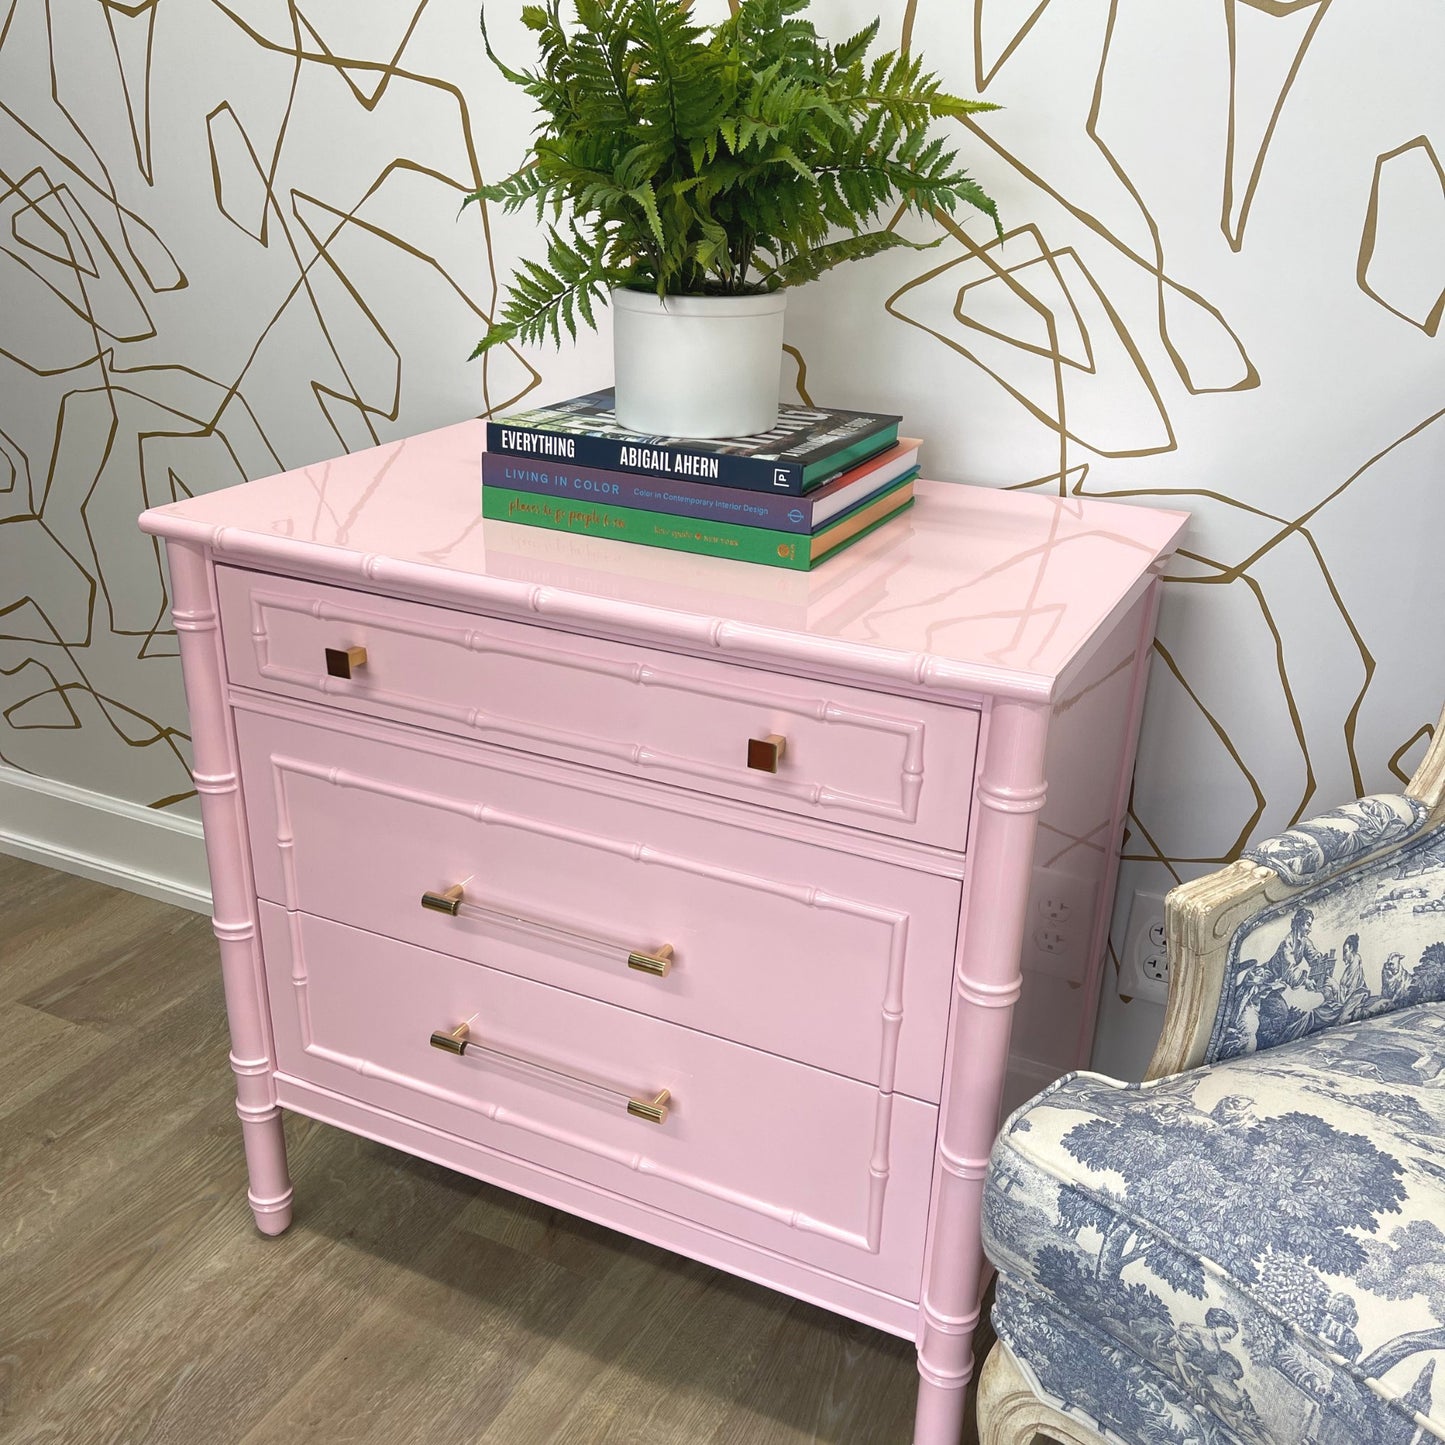 "Esther" Thomasville Faux Bamboo Dresser / Chest / Nightstand